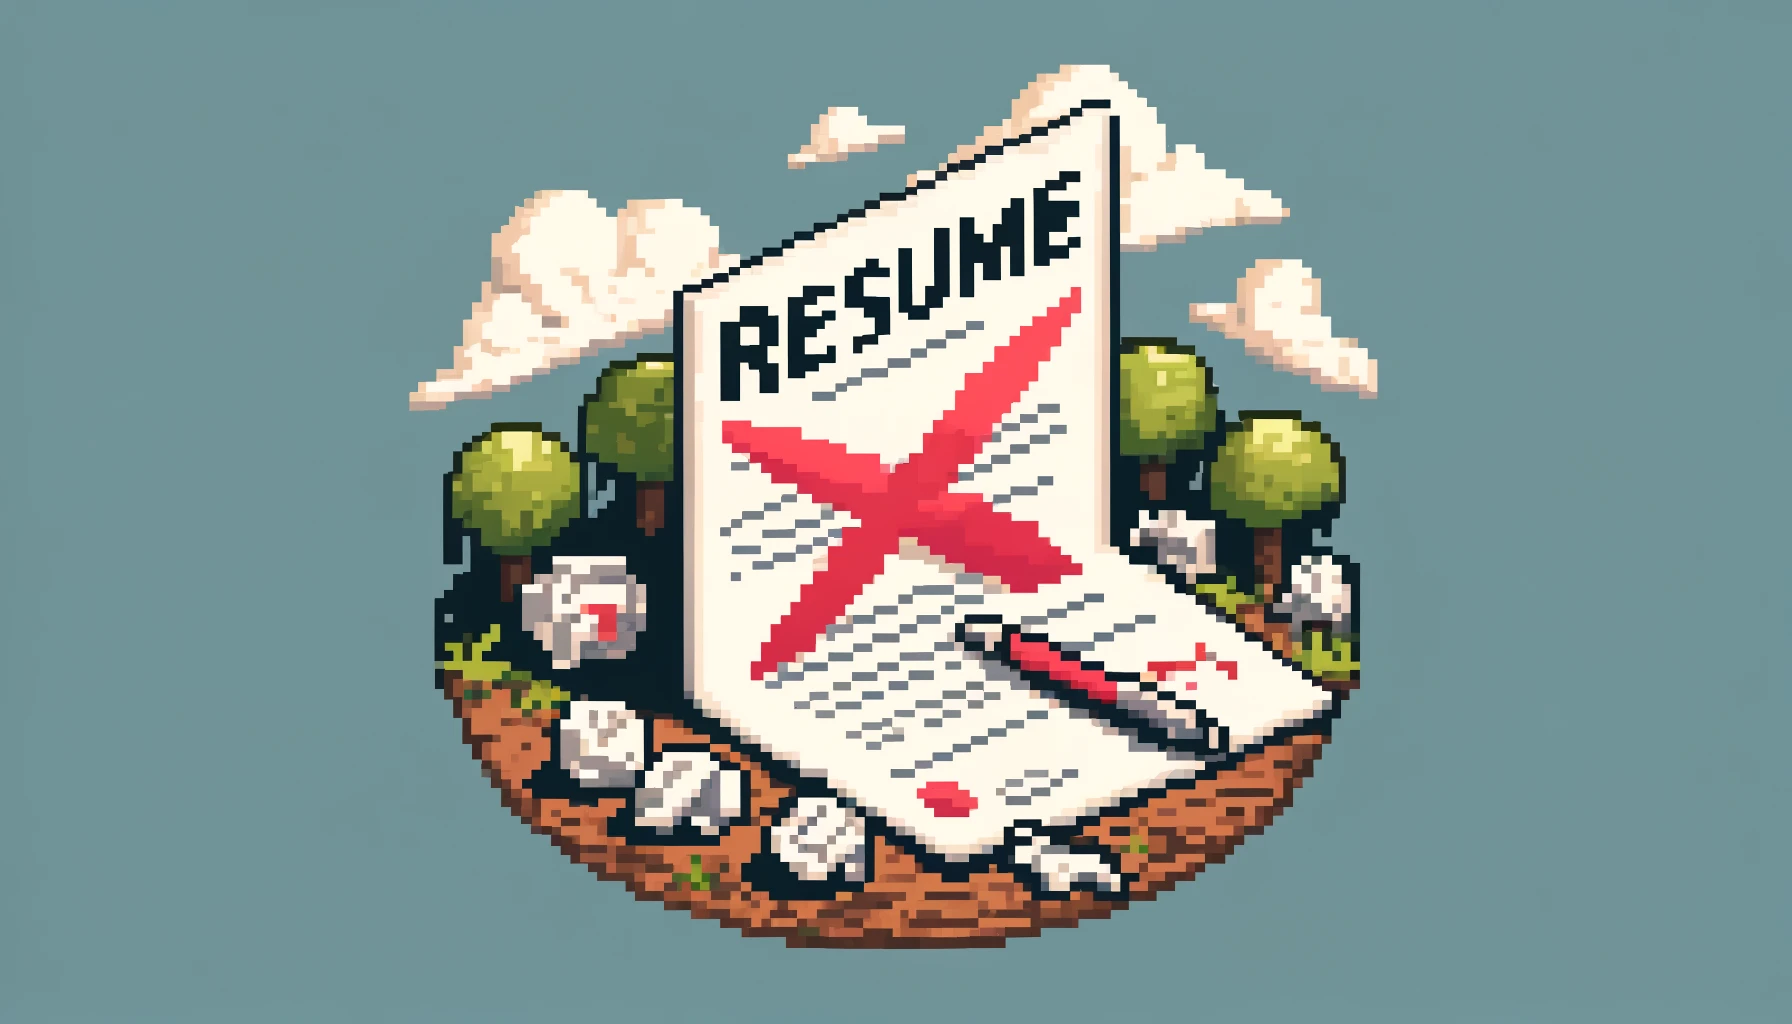 Resume Rejections causes